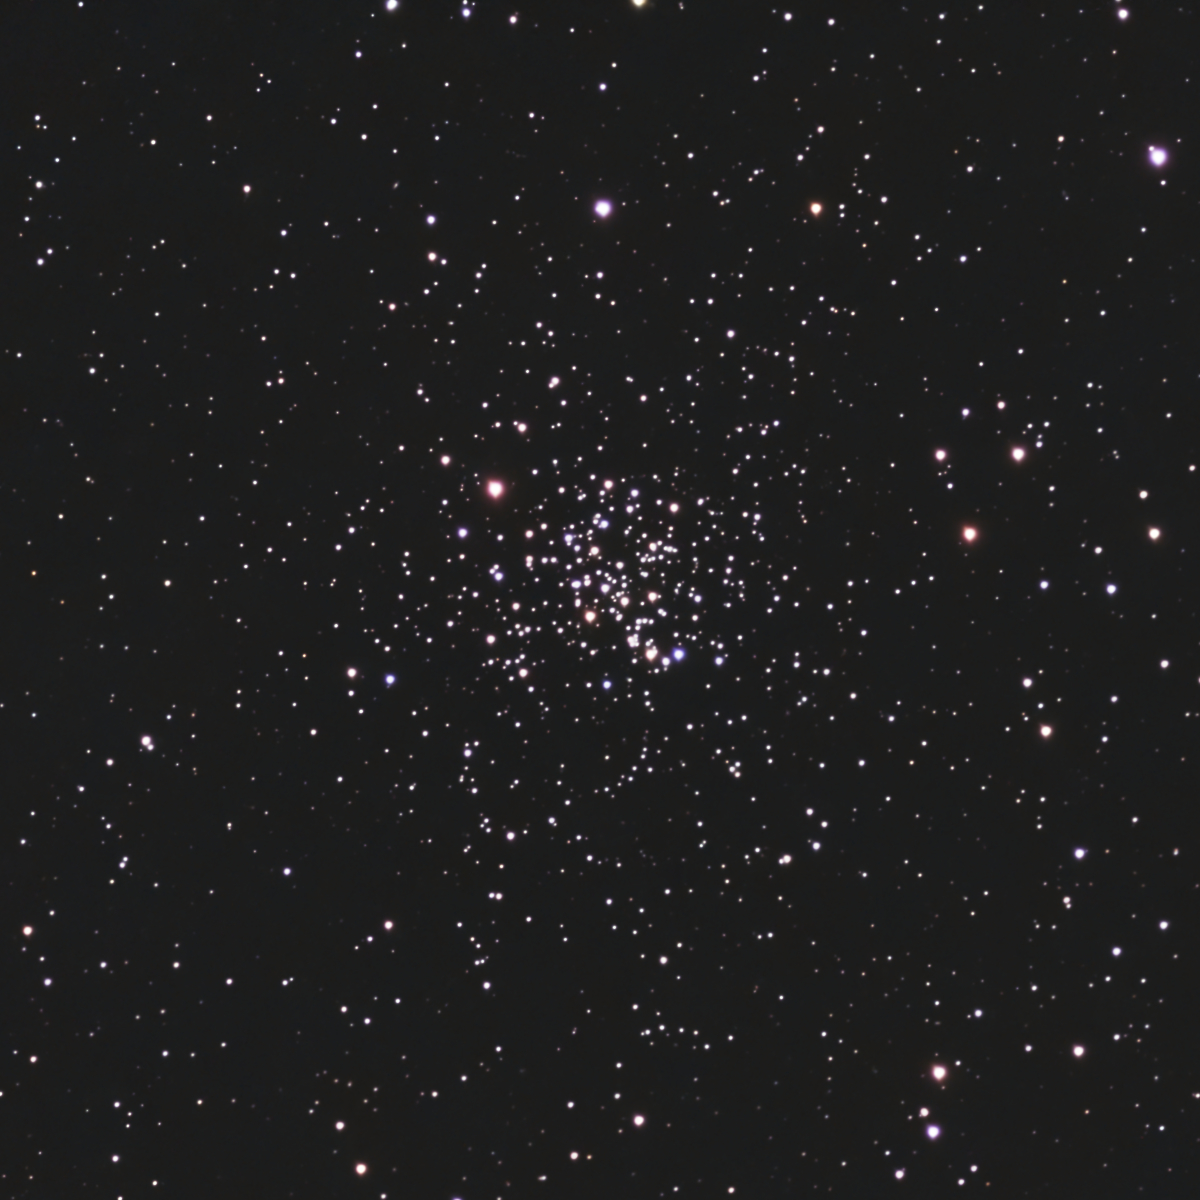 M67 – Open Cluster